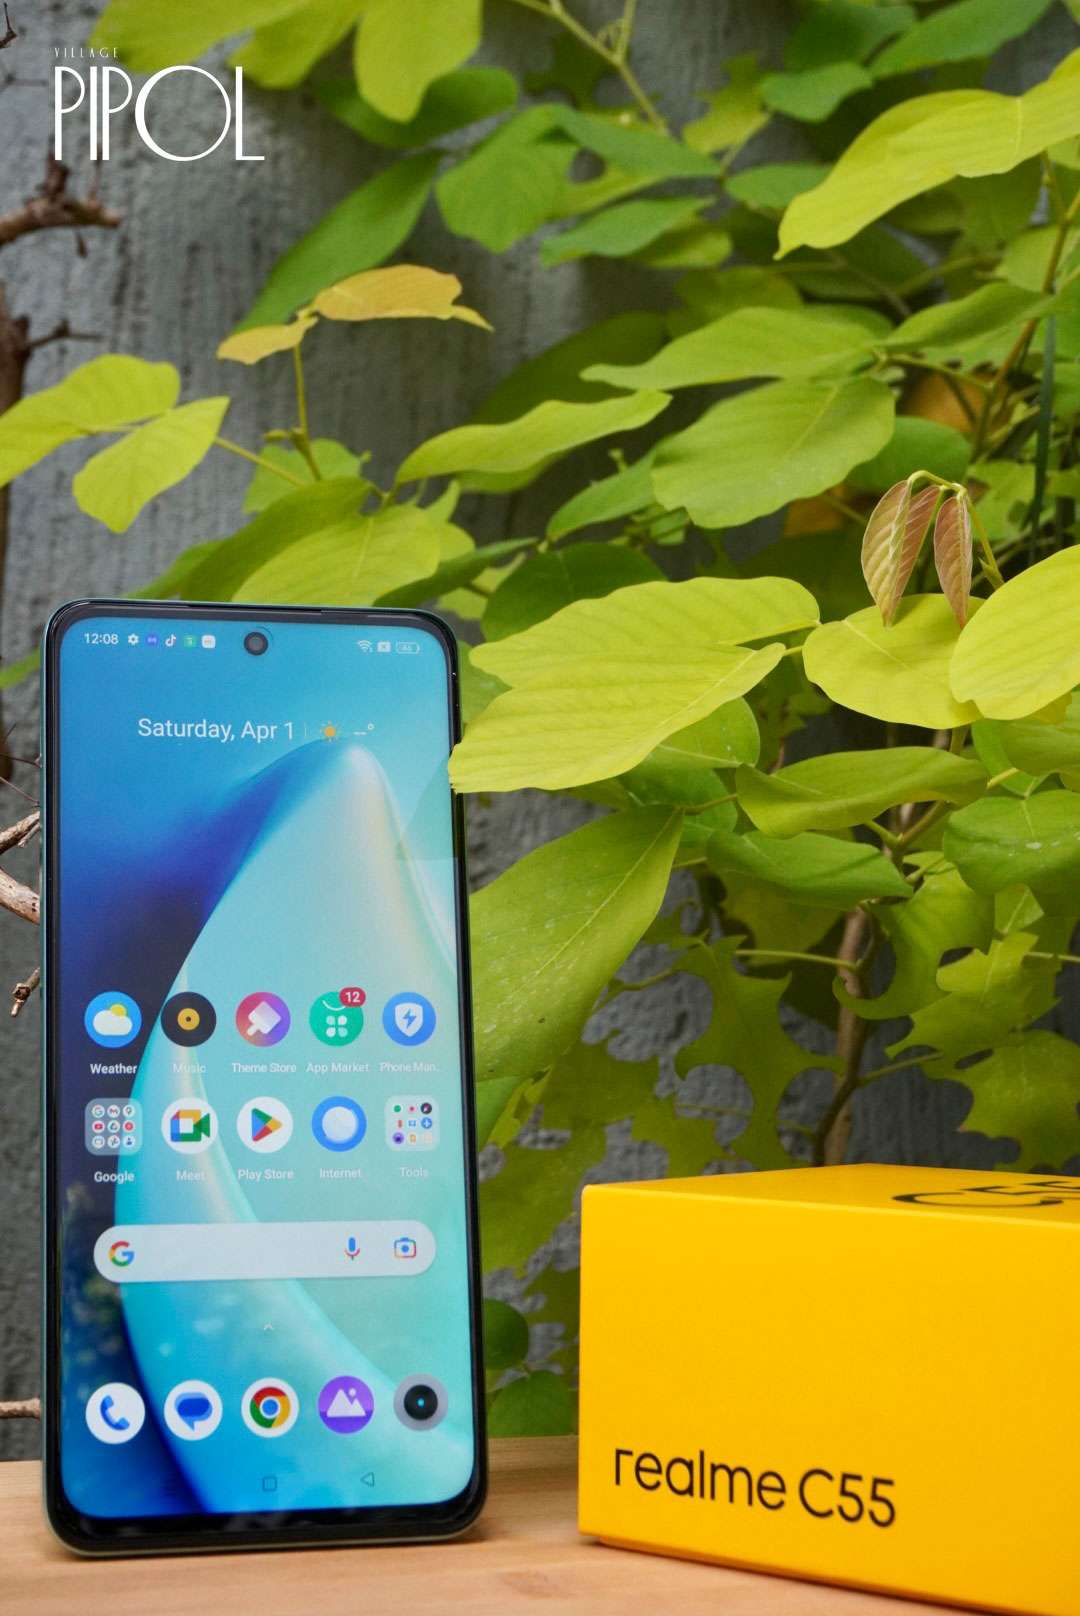 Realme C55 - Specs, Price, Reviews, and Best Deals